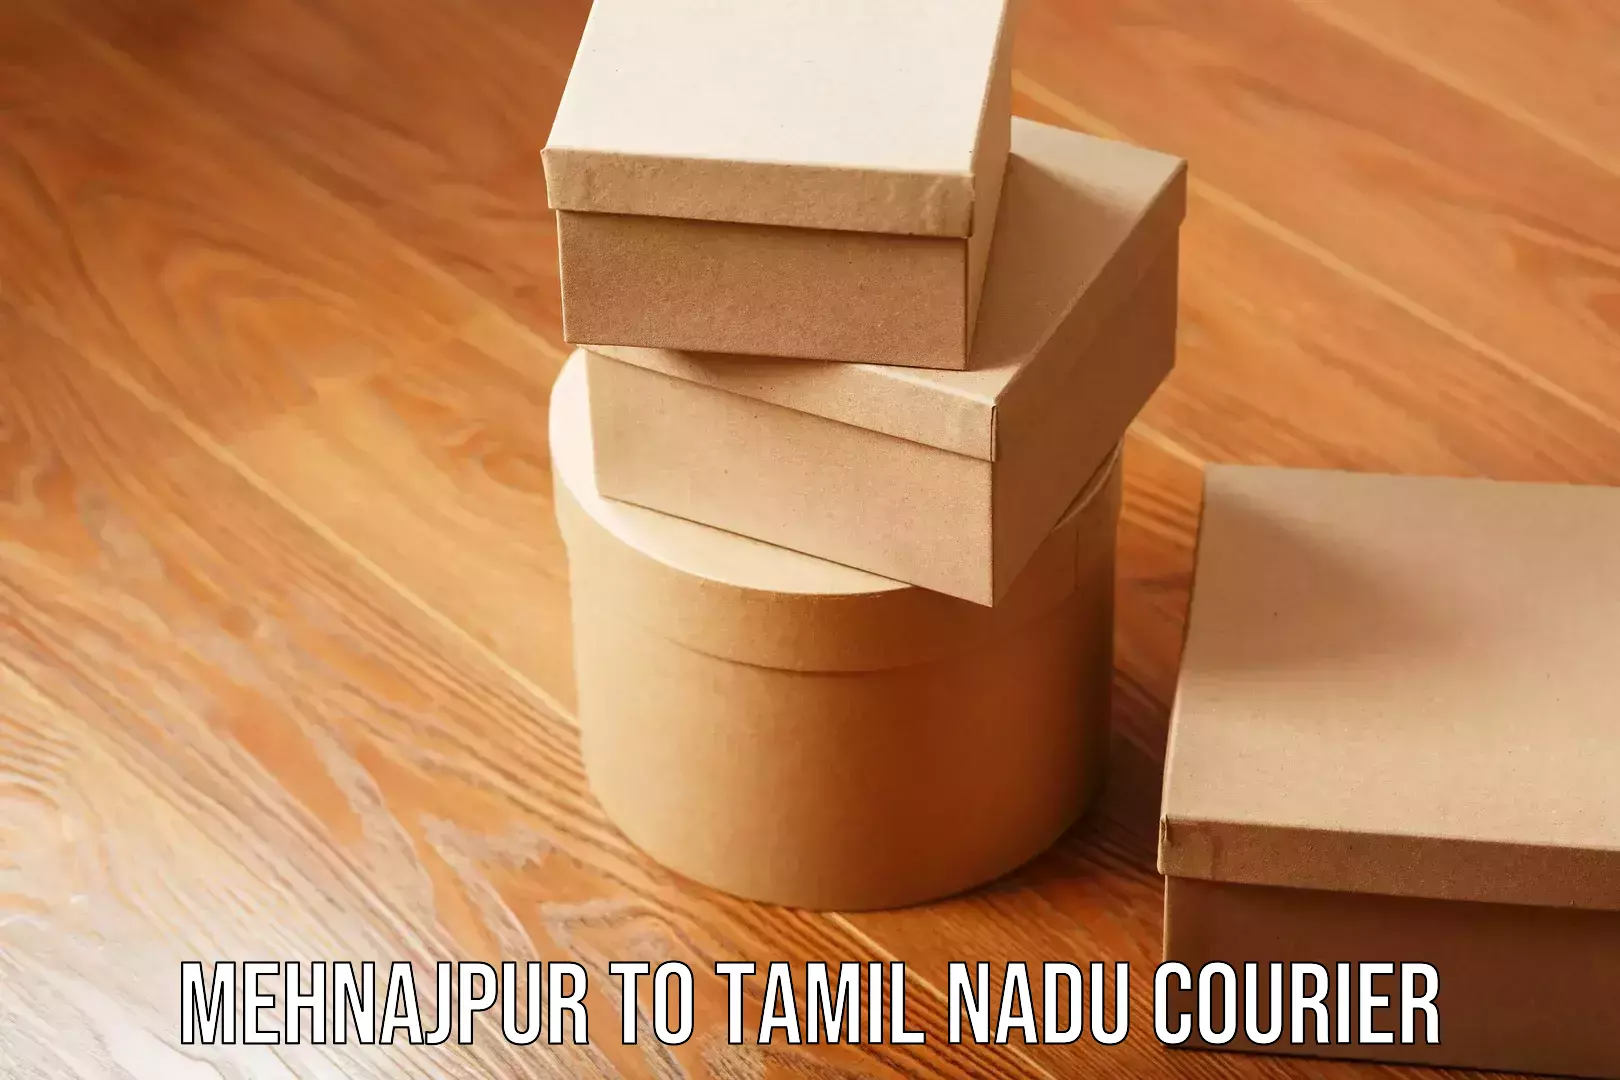 Reliable relocation services Mehnajpur to Tamil Nadu